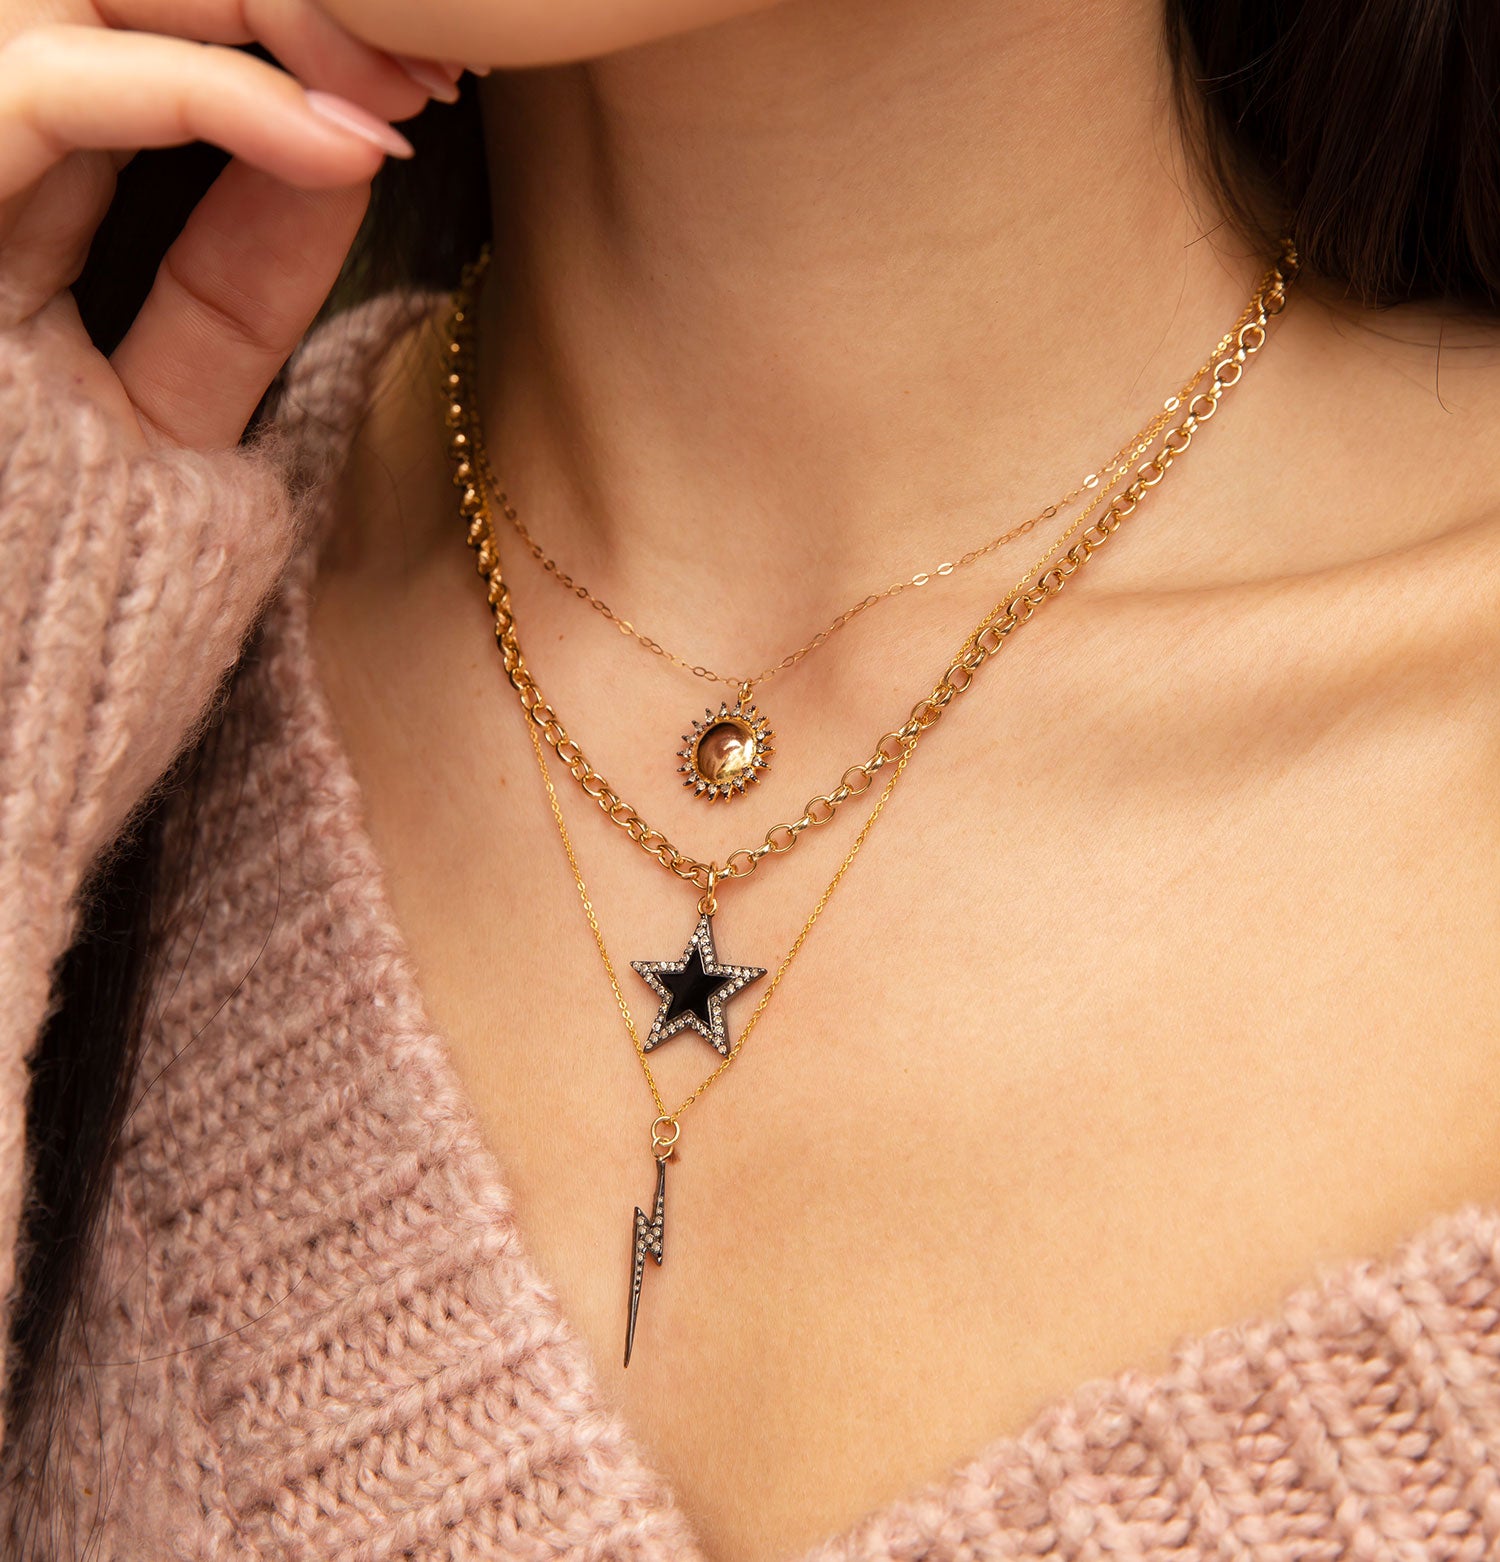 layered star and lightening bolt necklaces.jpeg__PID:80d73965-6763-4b06-bcc0-acb588dcf962